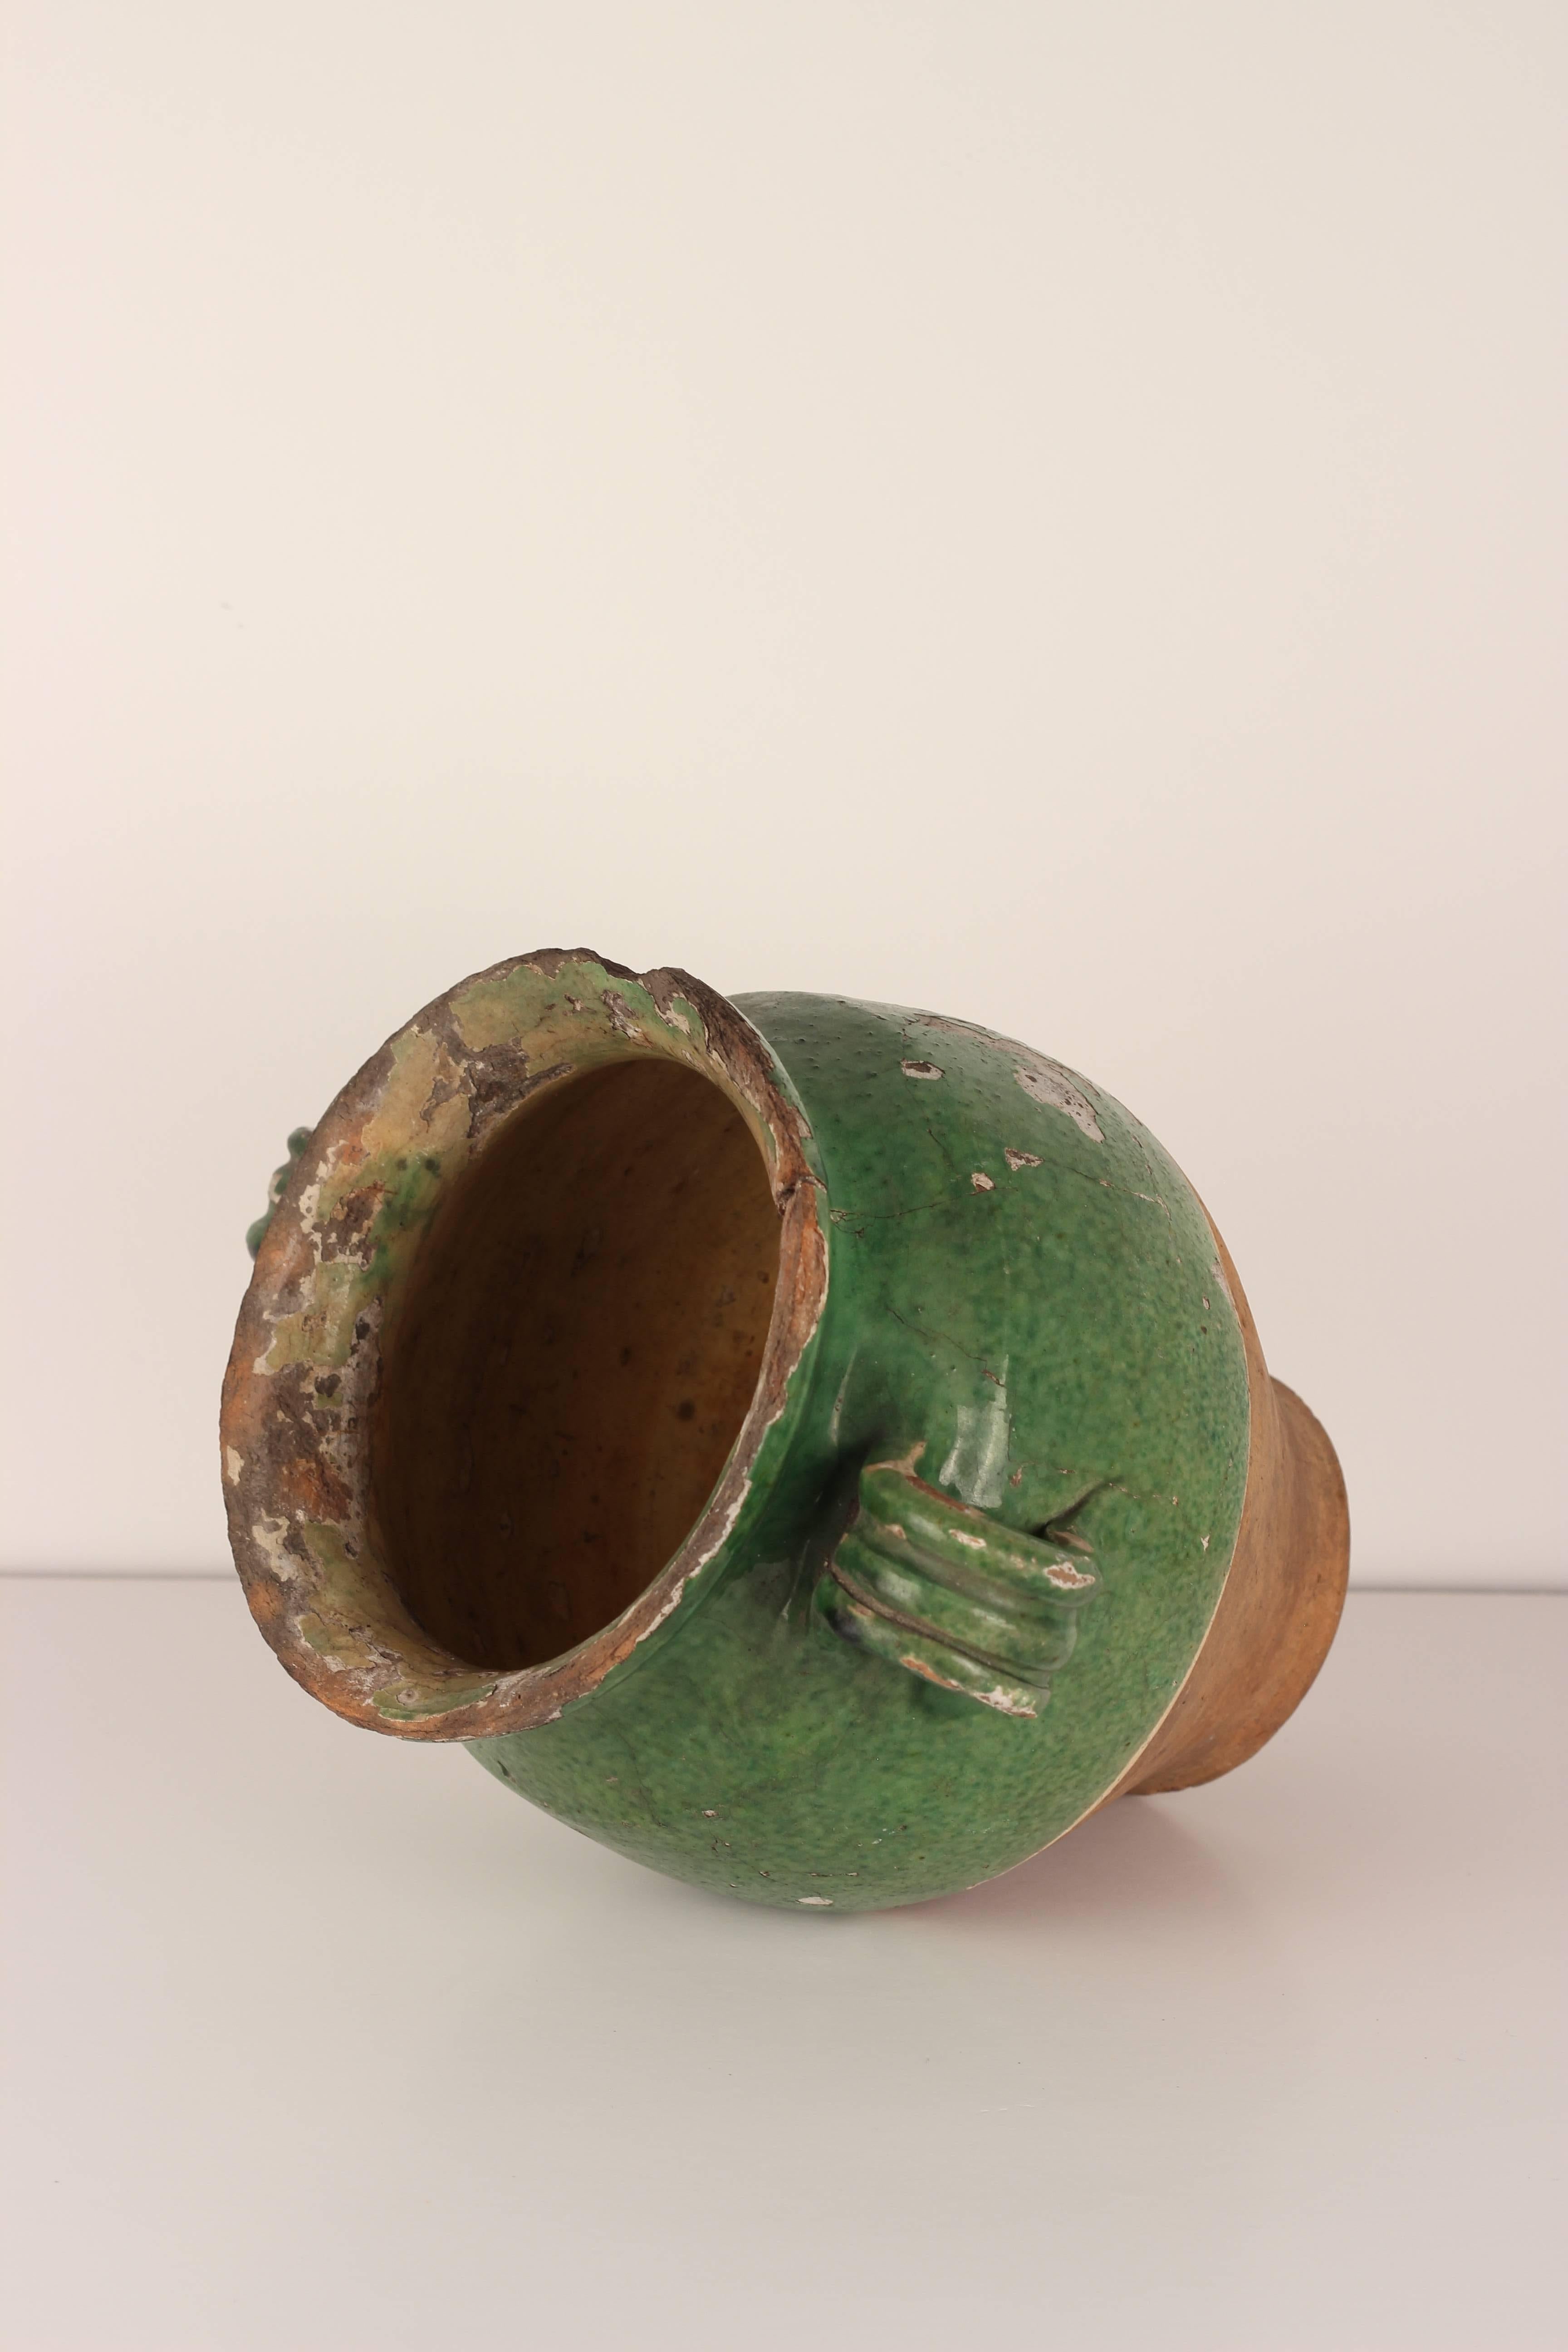 Clay Rare Green Confit Pot from the South of France, 19th Century